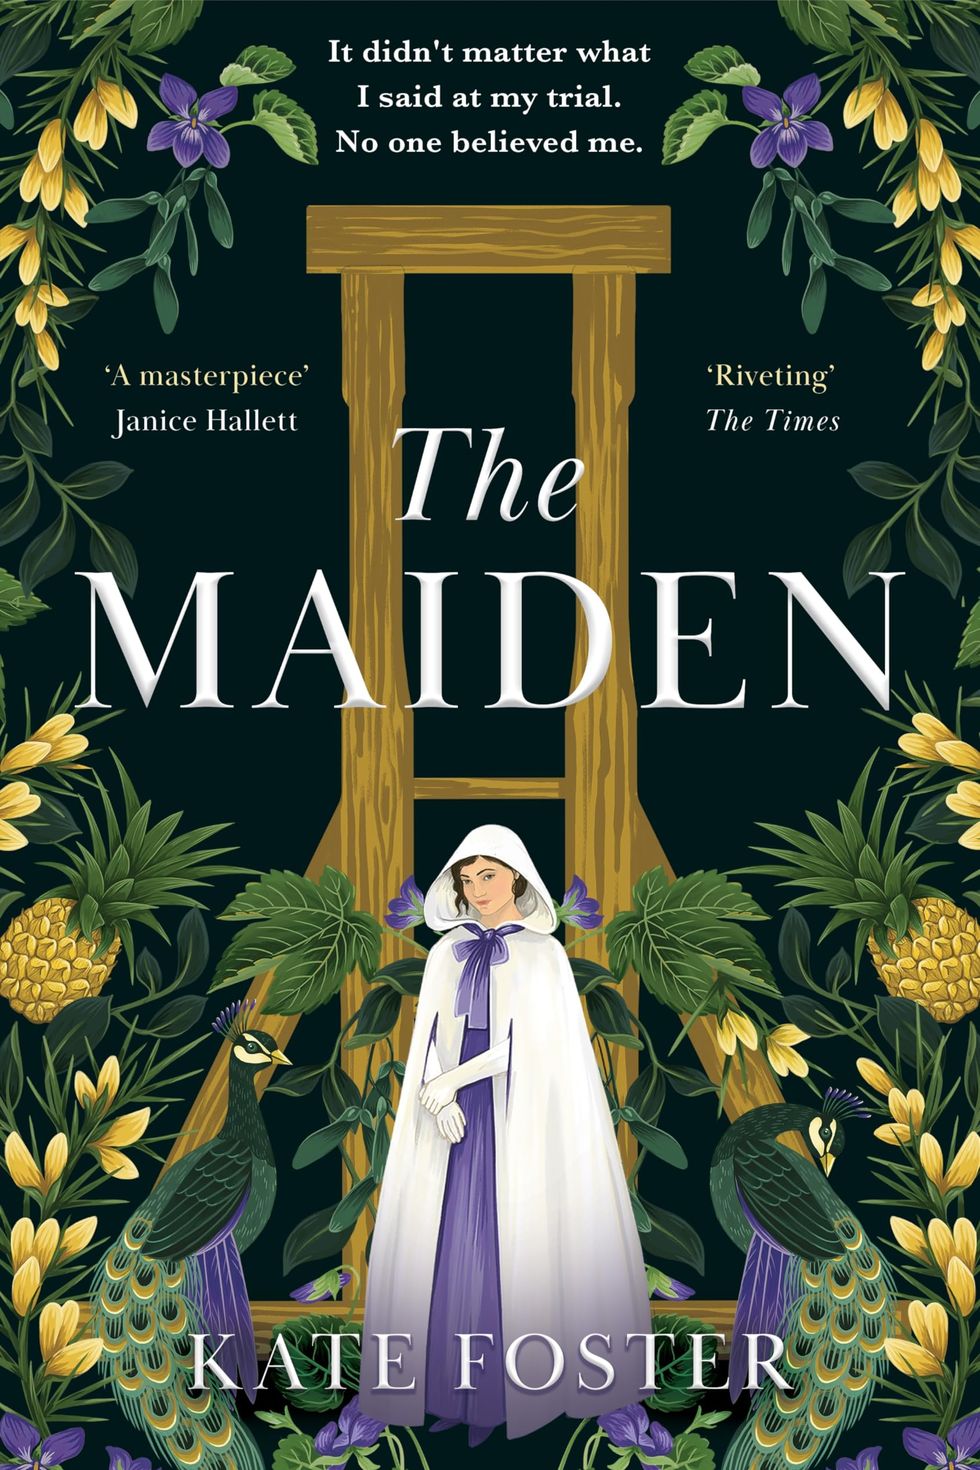 Kate Foster, 'The Maiden'